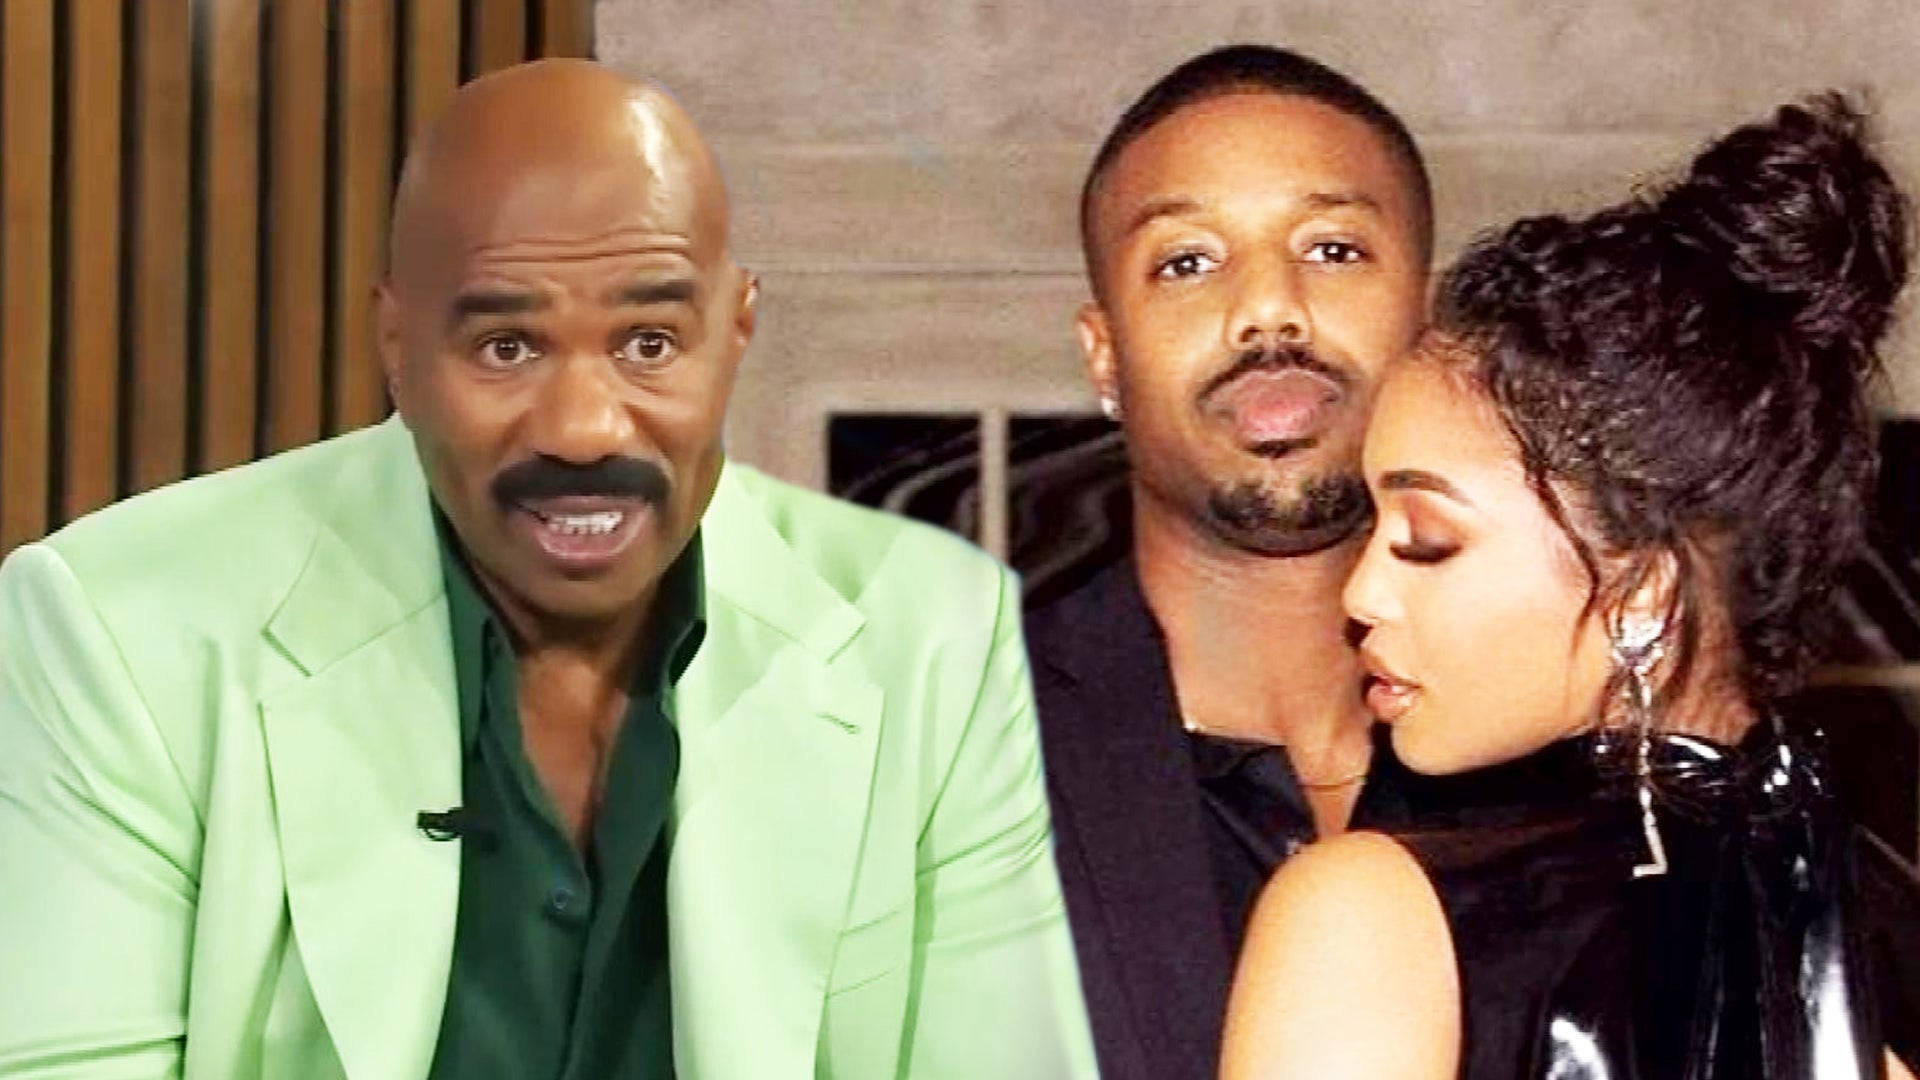 Renowned Television Host, Steve Harvey, Sharing A Moment With Hollywood Actor Michael B. Jordan